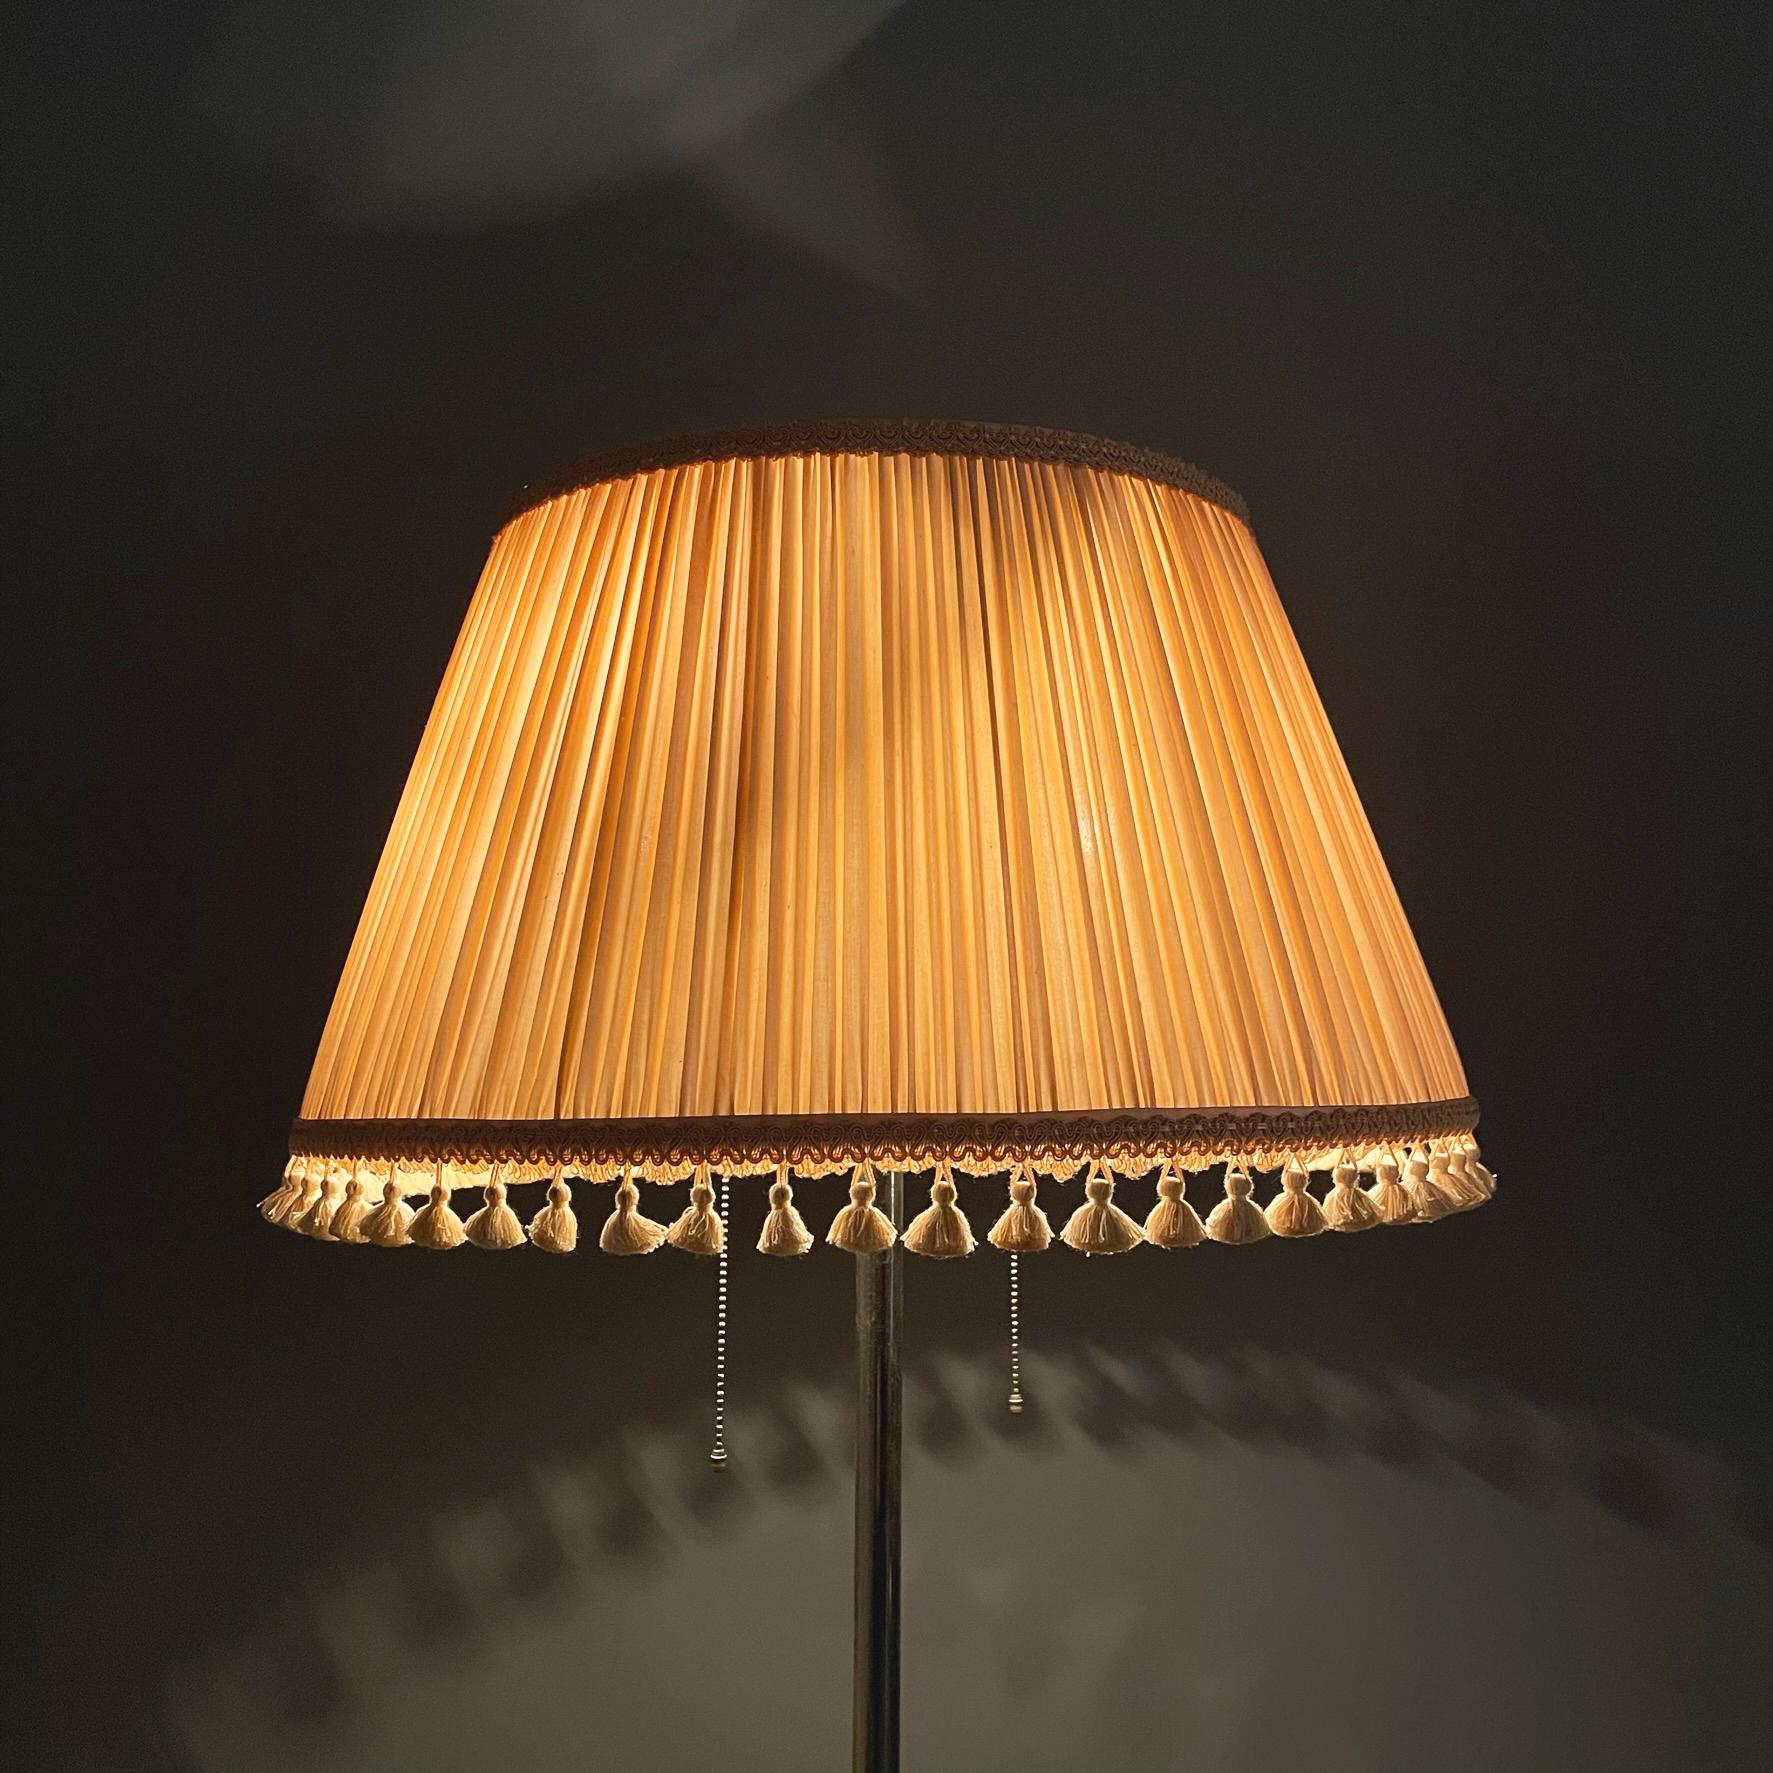 Early 20th Century Italian Floor Lamp in Peach Pink Pleated Fabric, Black Metal, 1920s-1930s For Sale